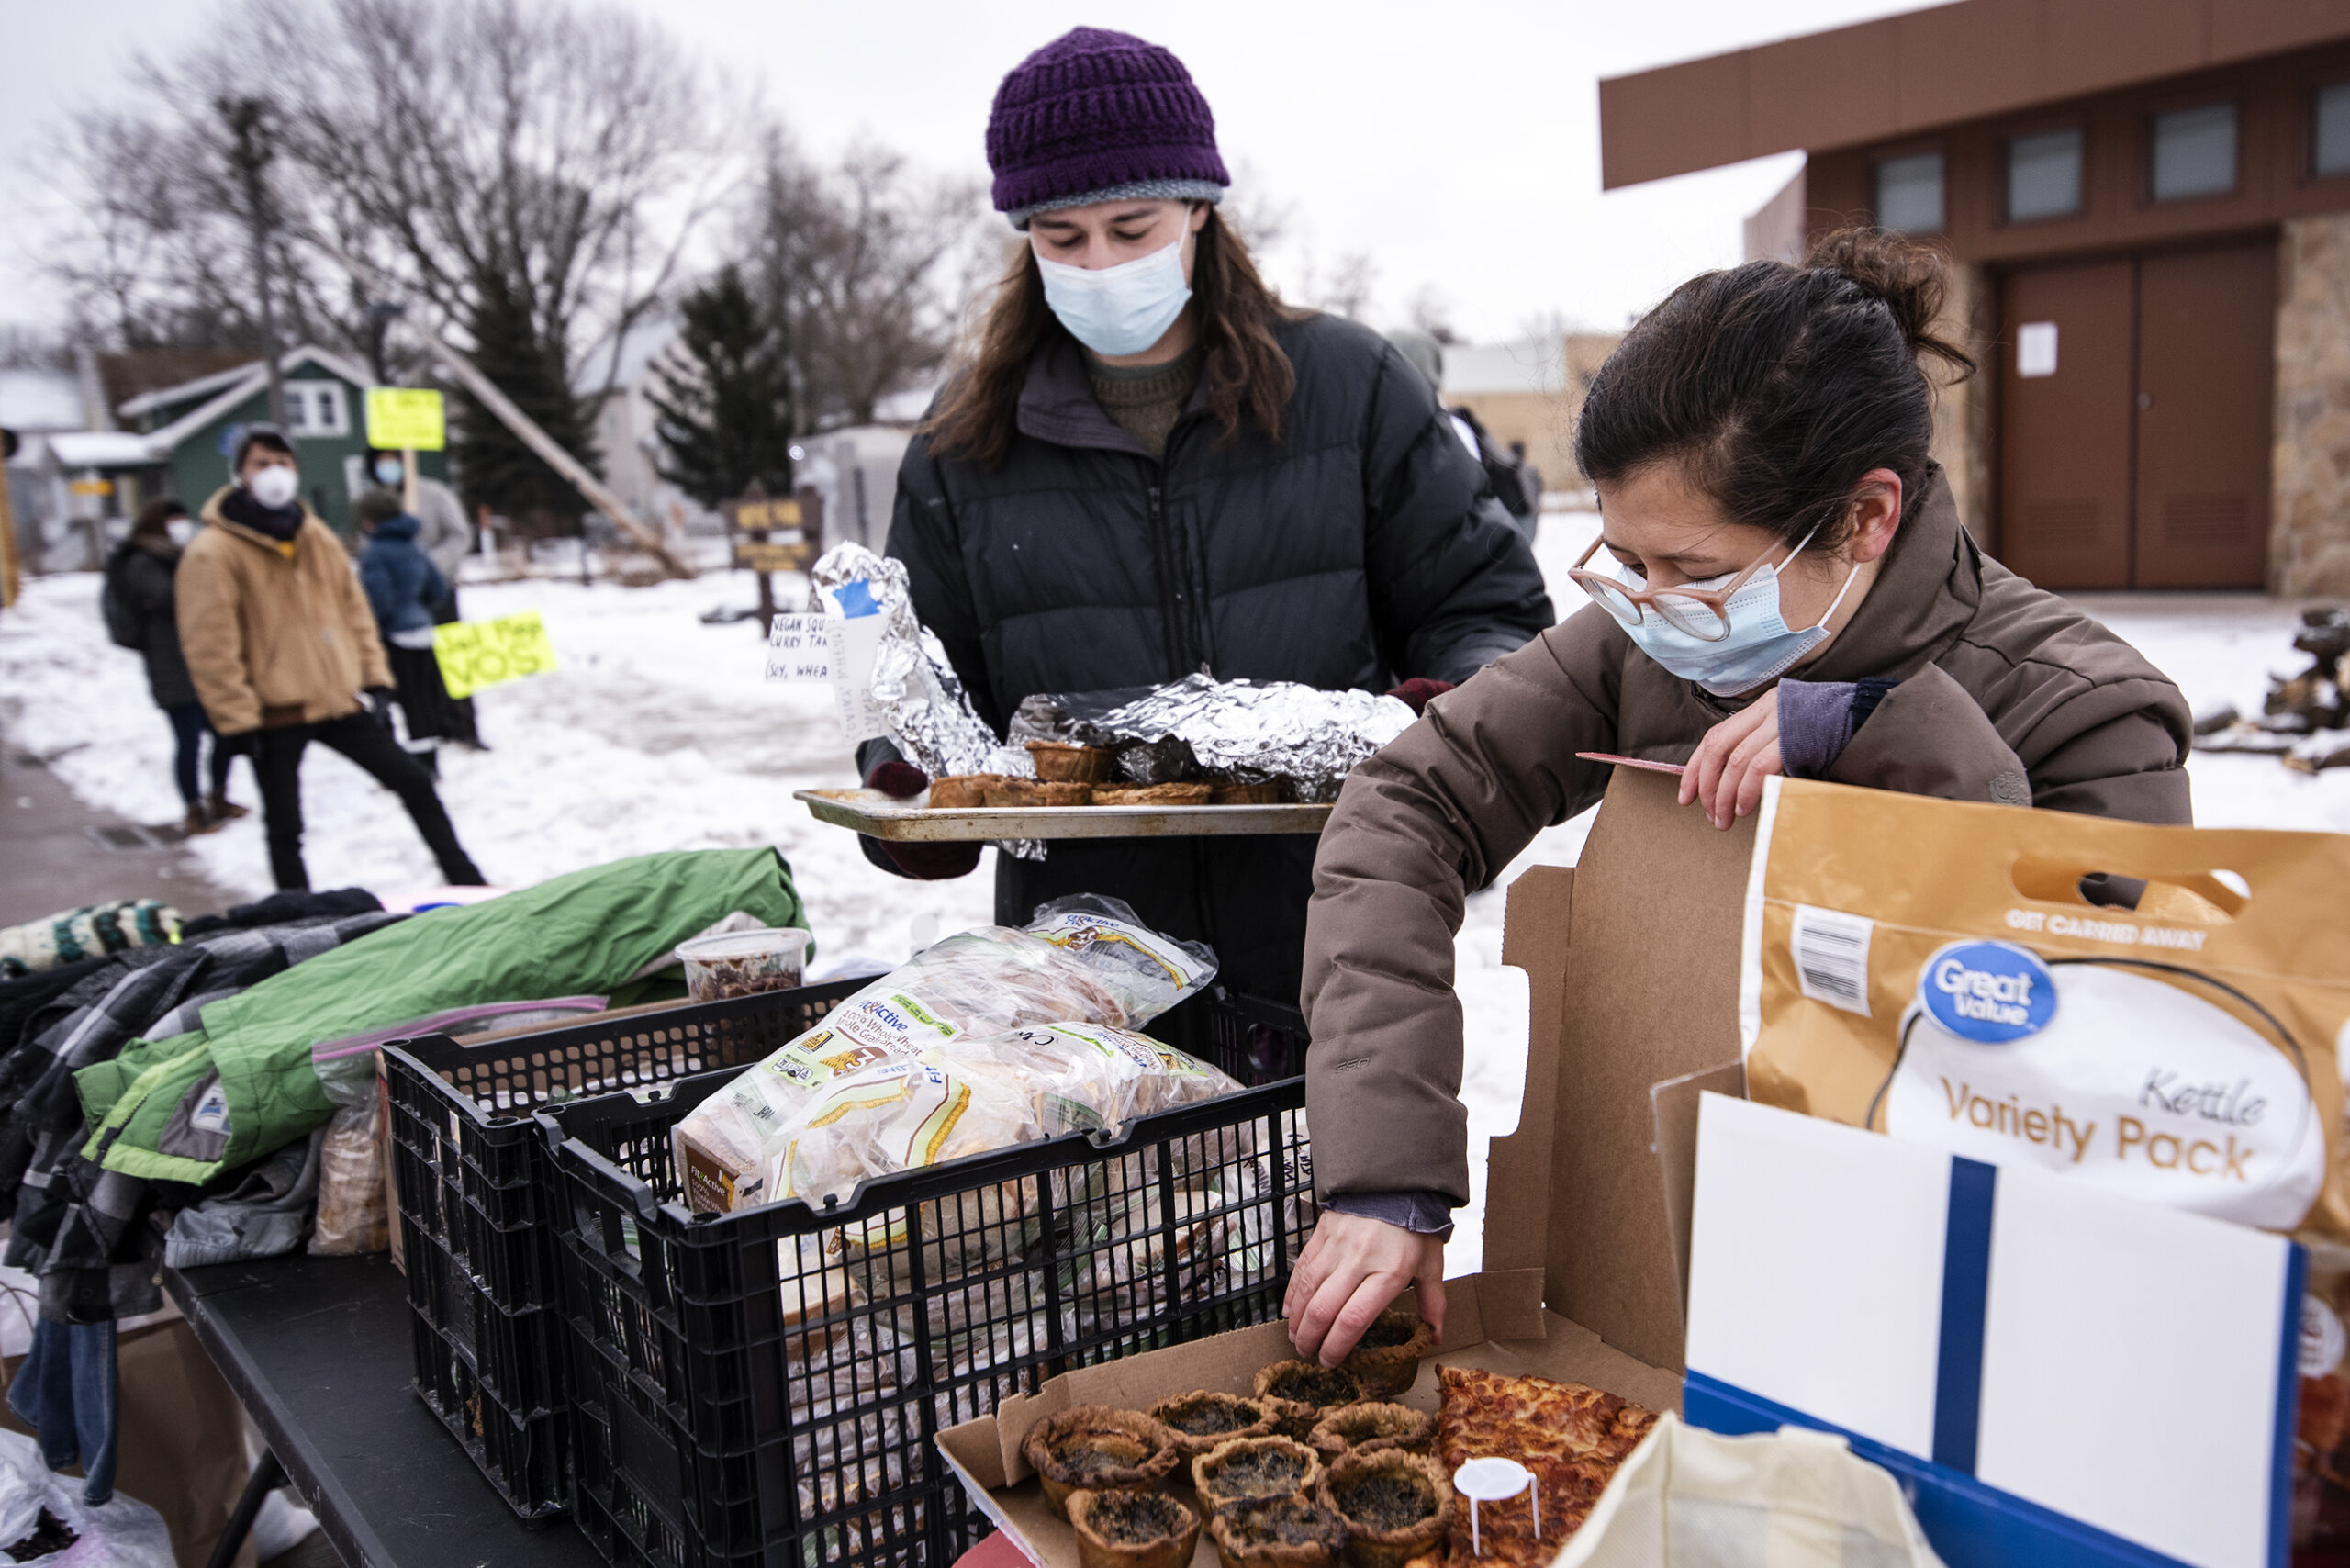 two people in winter gear and face masks place small tarts into a box next to other donated items